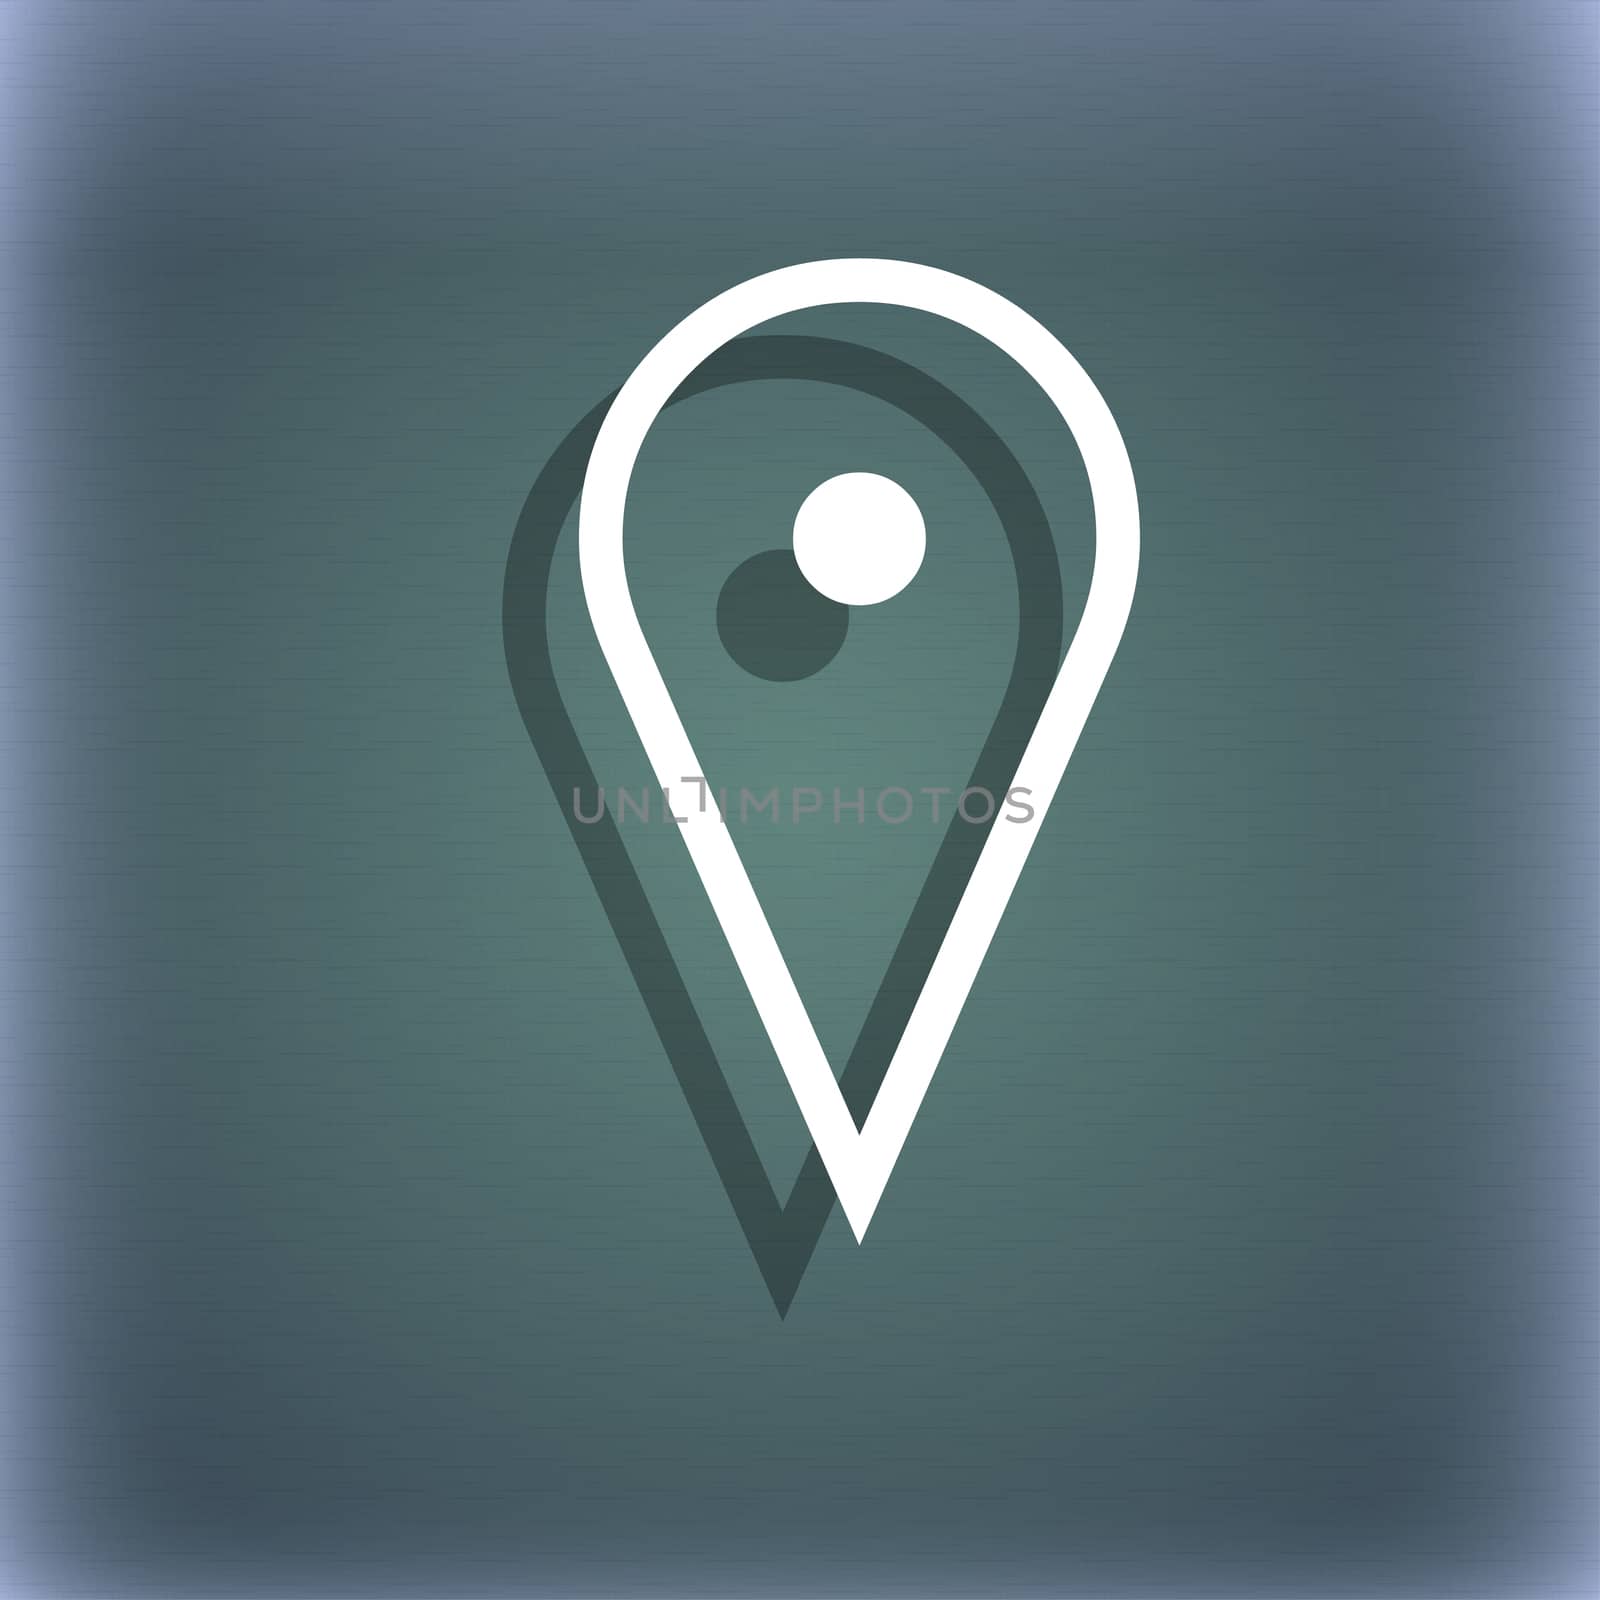 map poiner icon symbol on the blue-green abstract background with shadow and space for your text.  by serhii_lohvyniuk